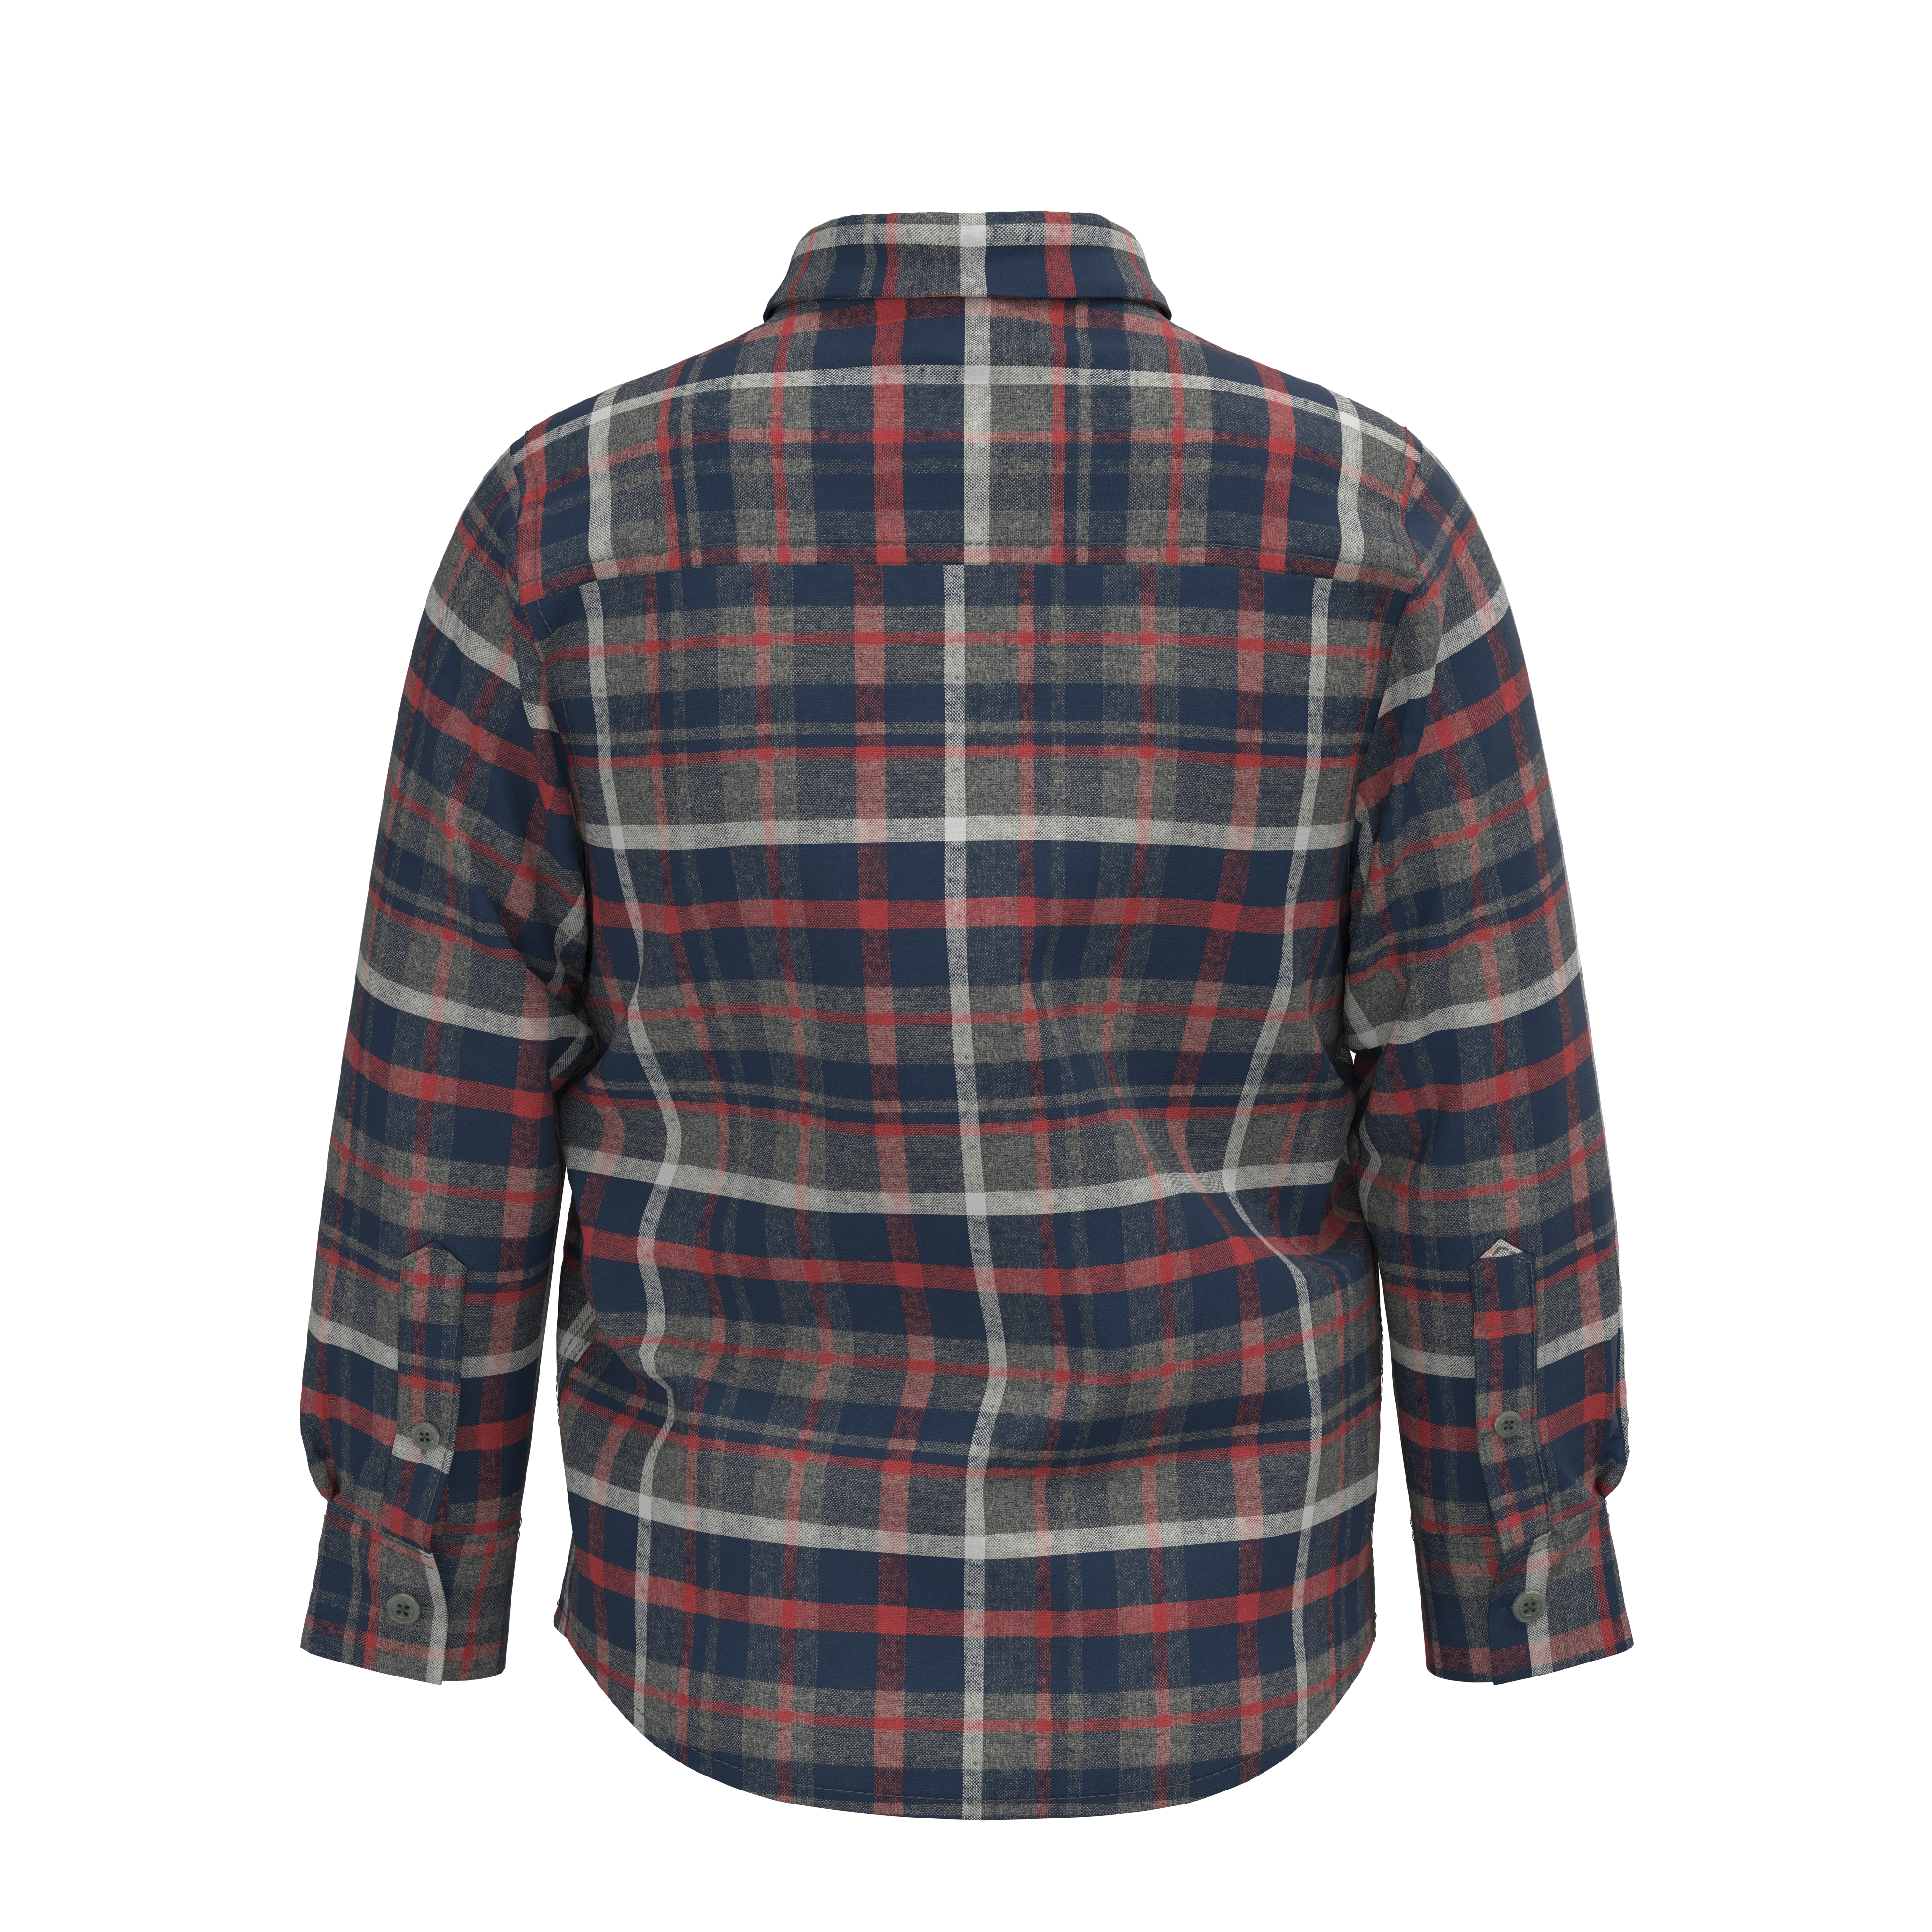 Wool-Blend Shirt with Contrast Pocket